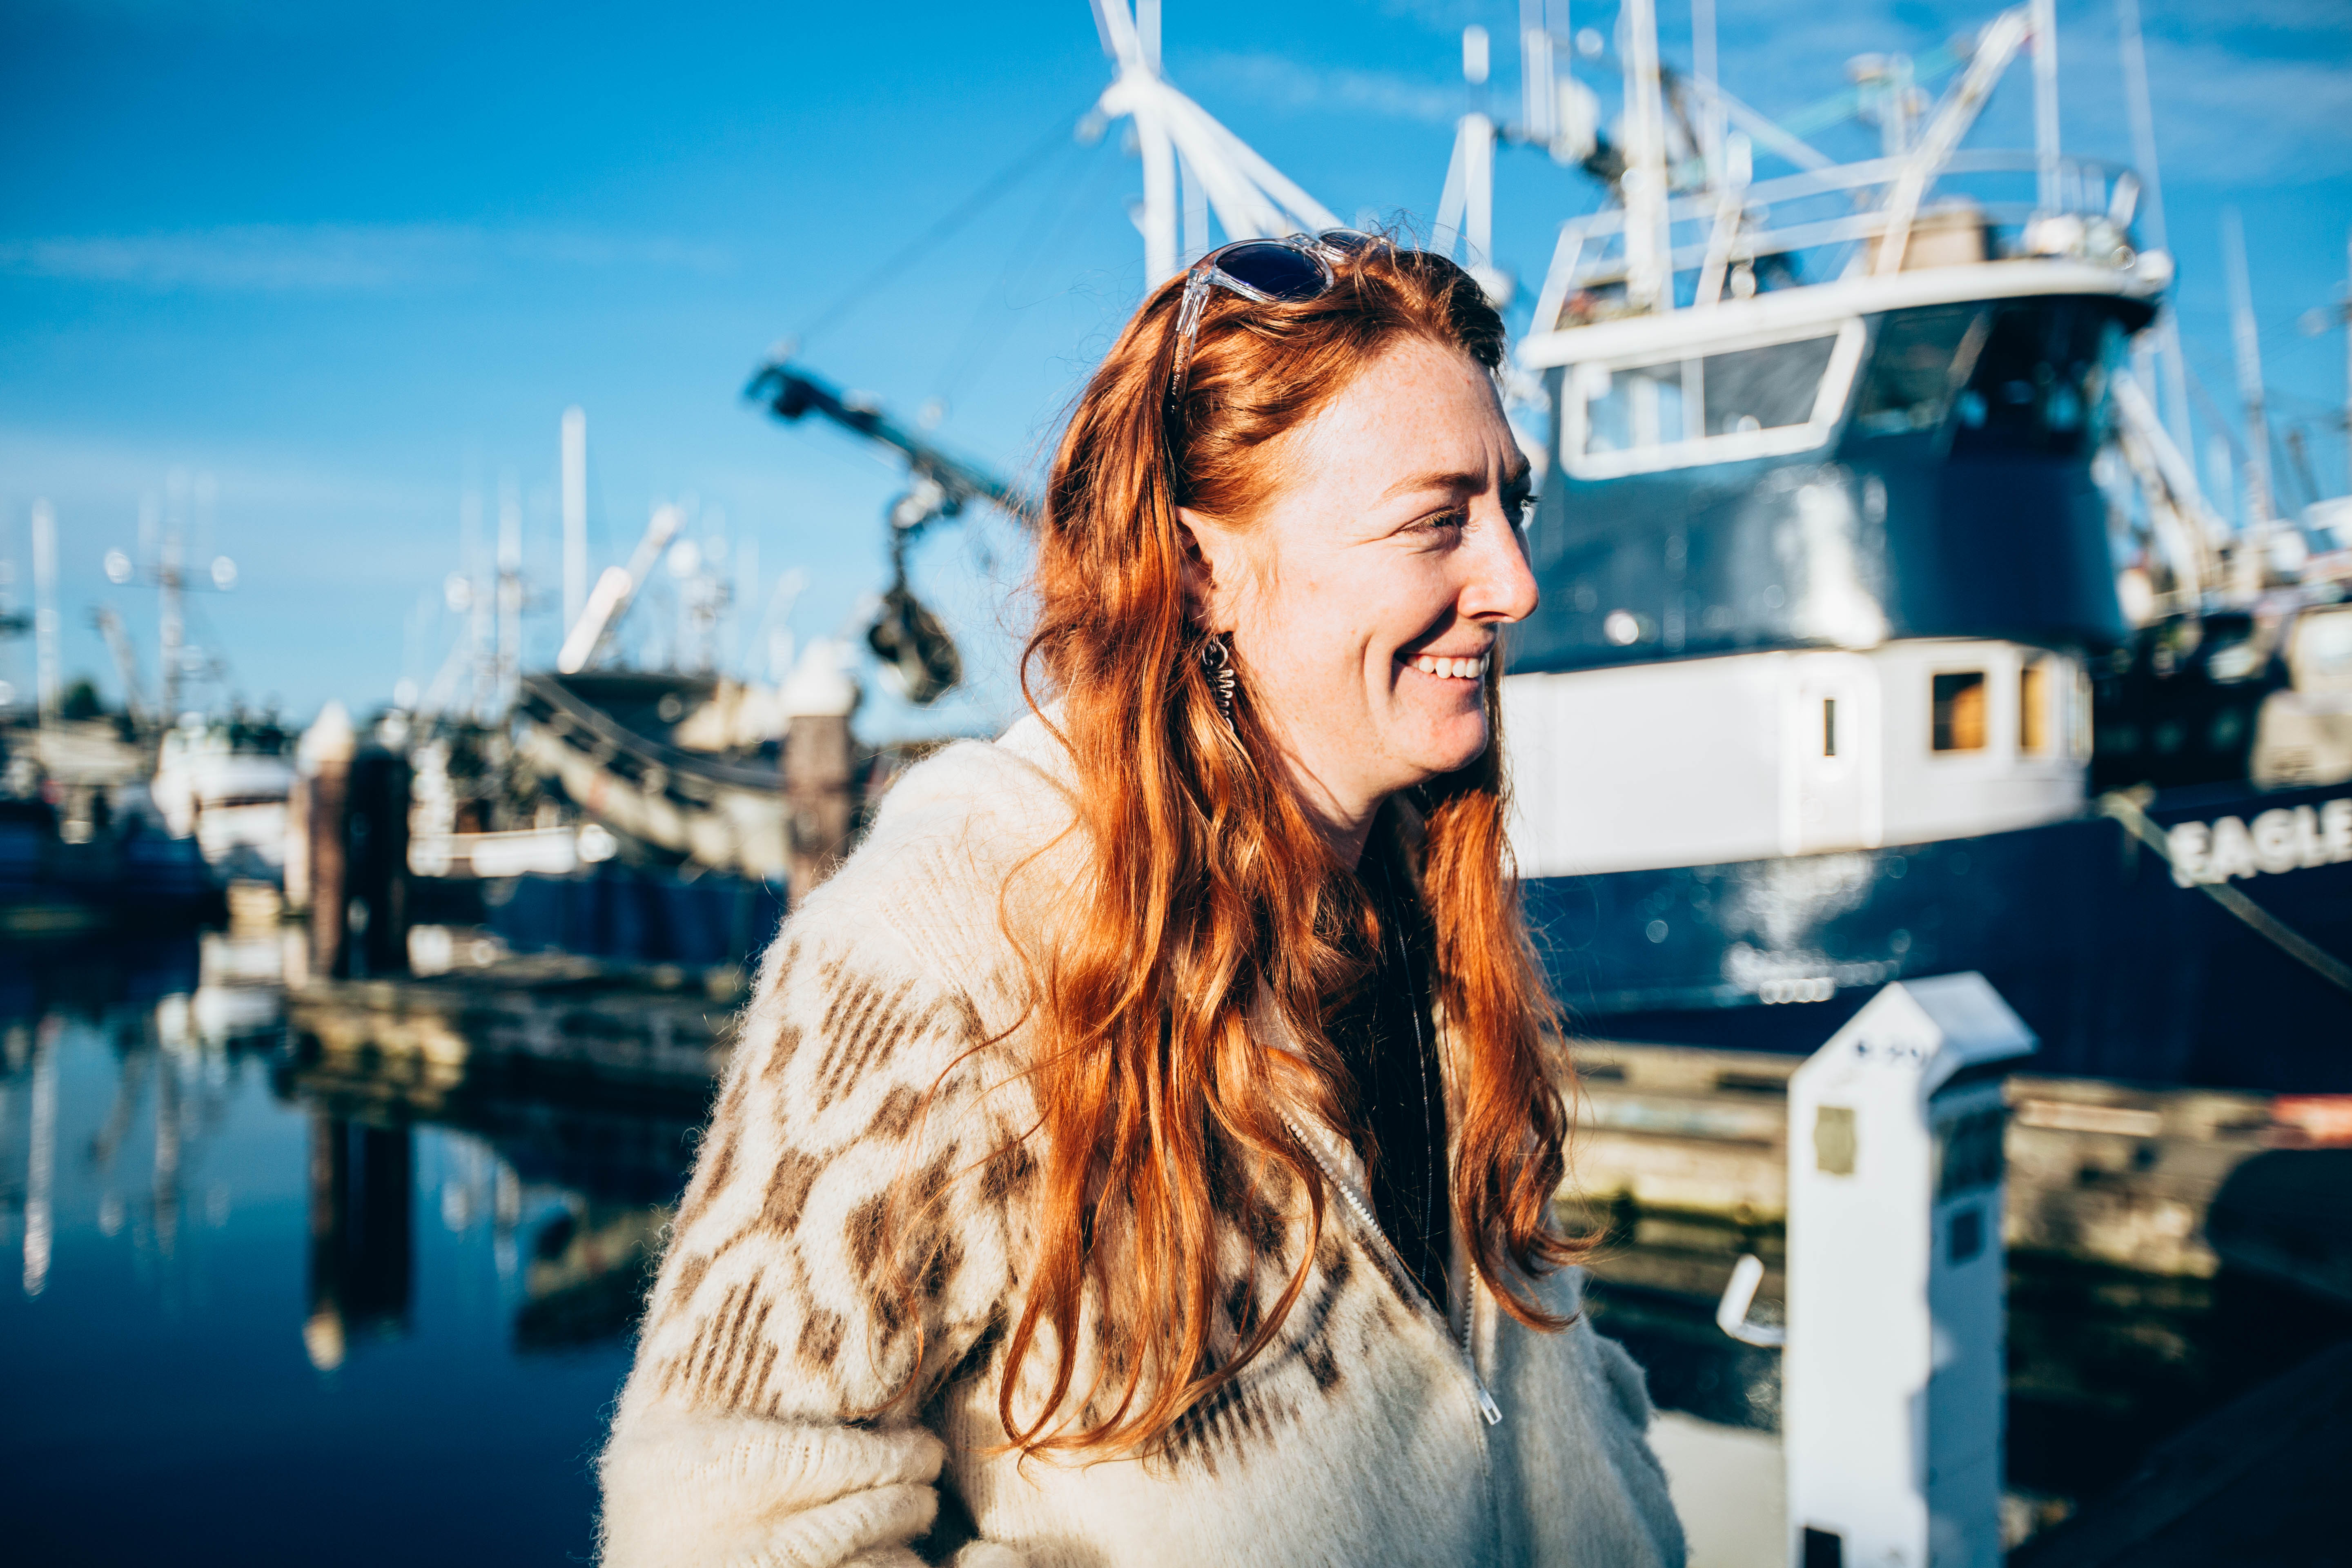 Elma stands on the dock at Bellingham Marina on Tuesday, May 7, 2019. (Photo by Regan Bervar)